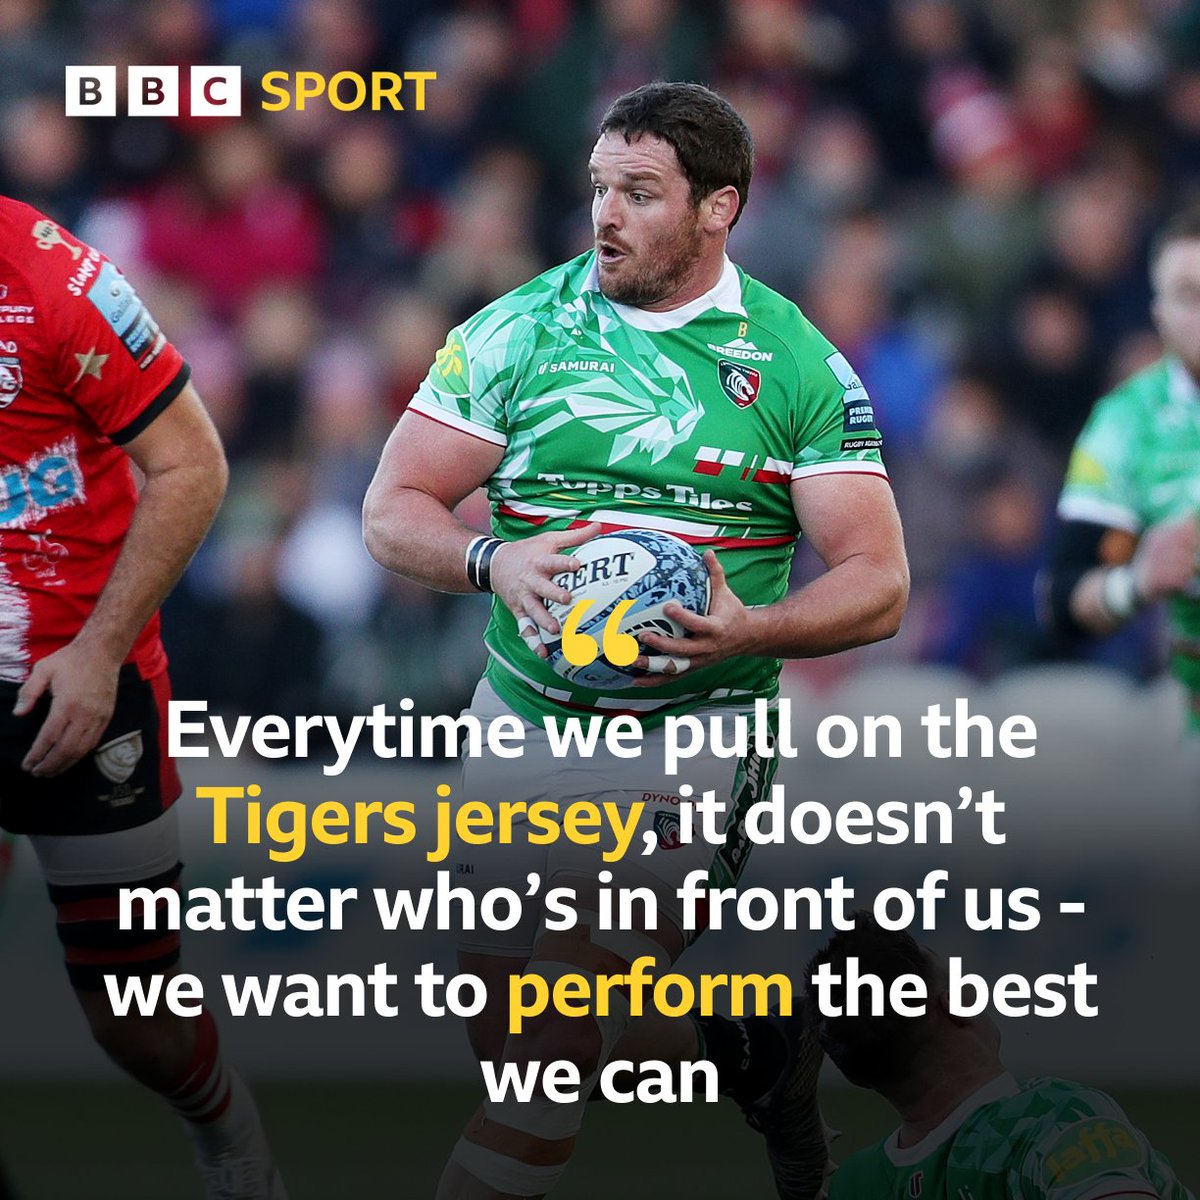 Julián Montoya led out the Leicester Tigers at Welford Road today, for the first time this Premiership season 🐯 The hooker is a vital cog to have back in the side. He told us after today's victory, every game is as important as the last 🗣️